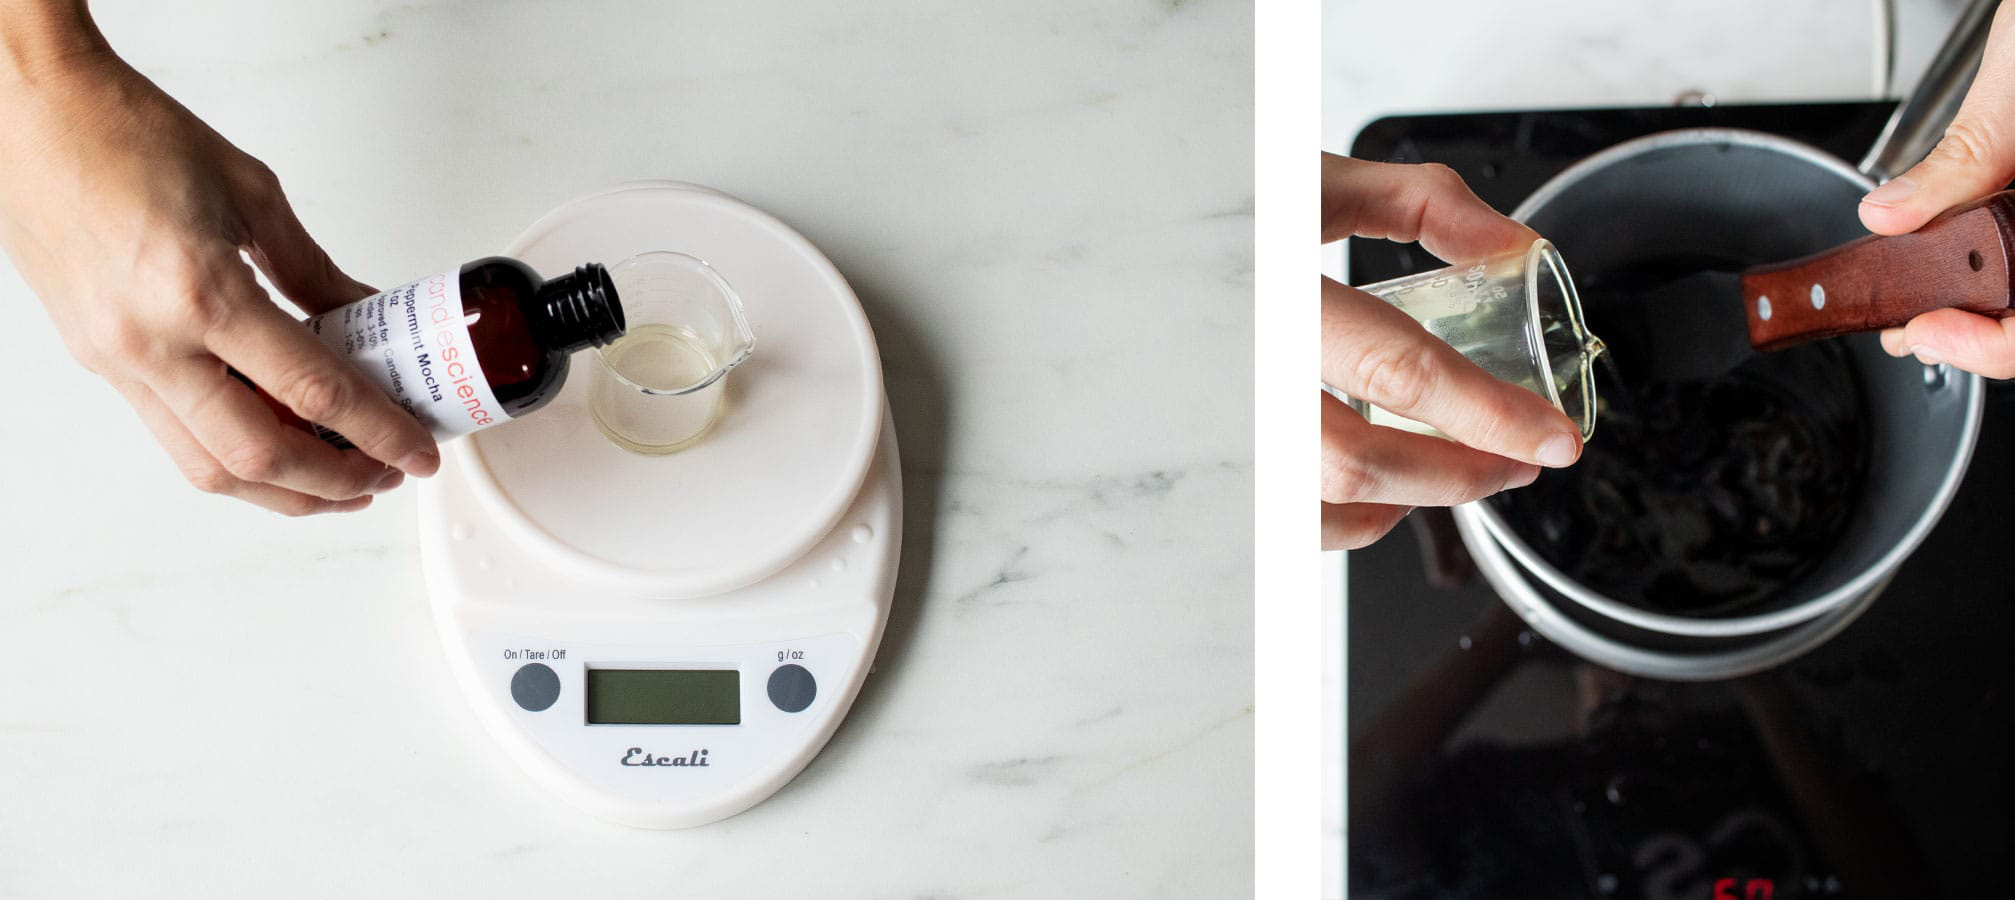 Weighing fragrance oil and pouring it into melted soy candle wax.